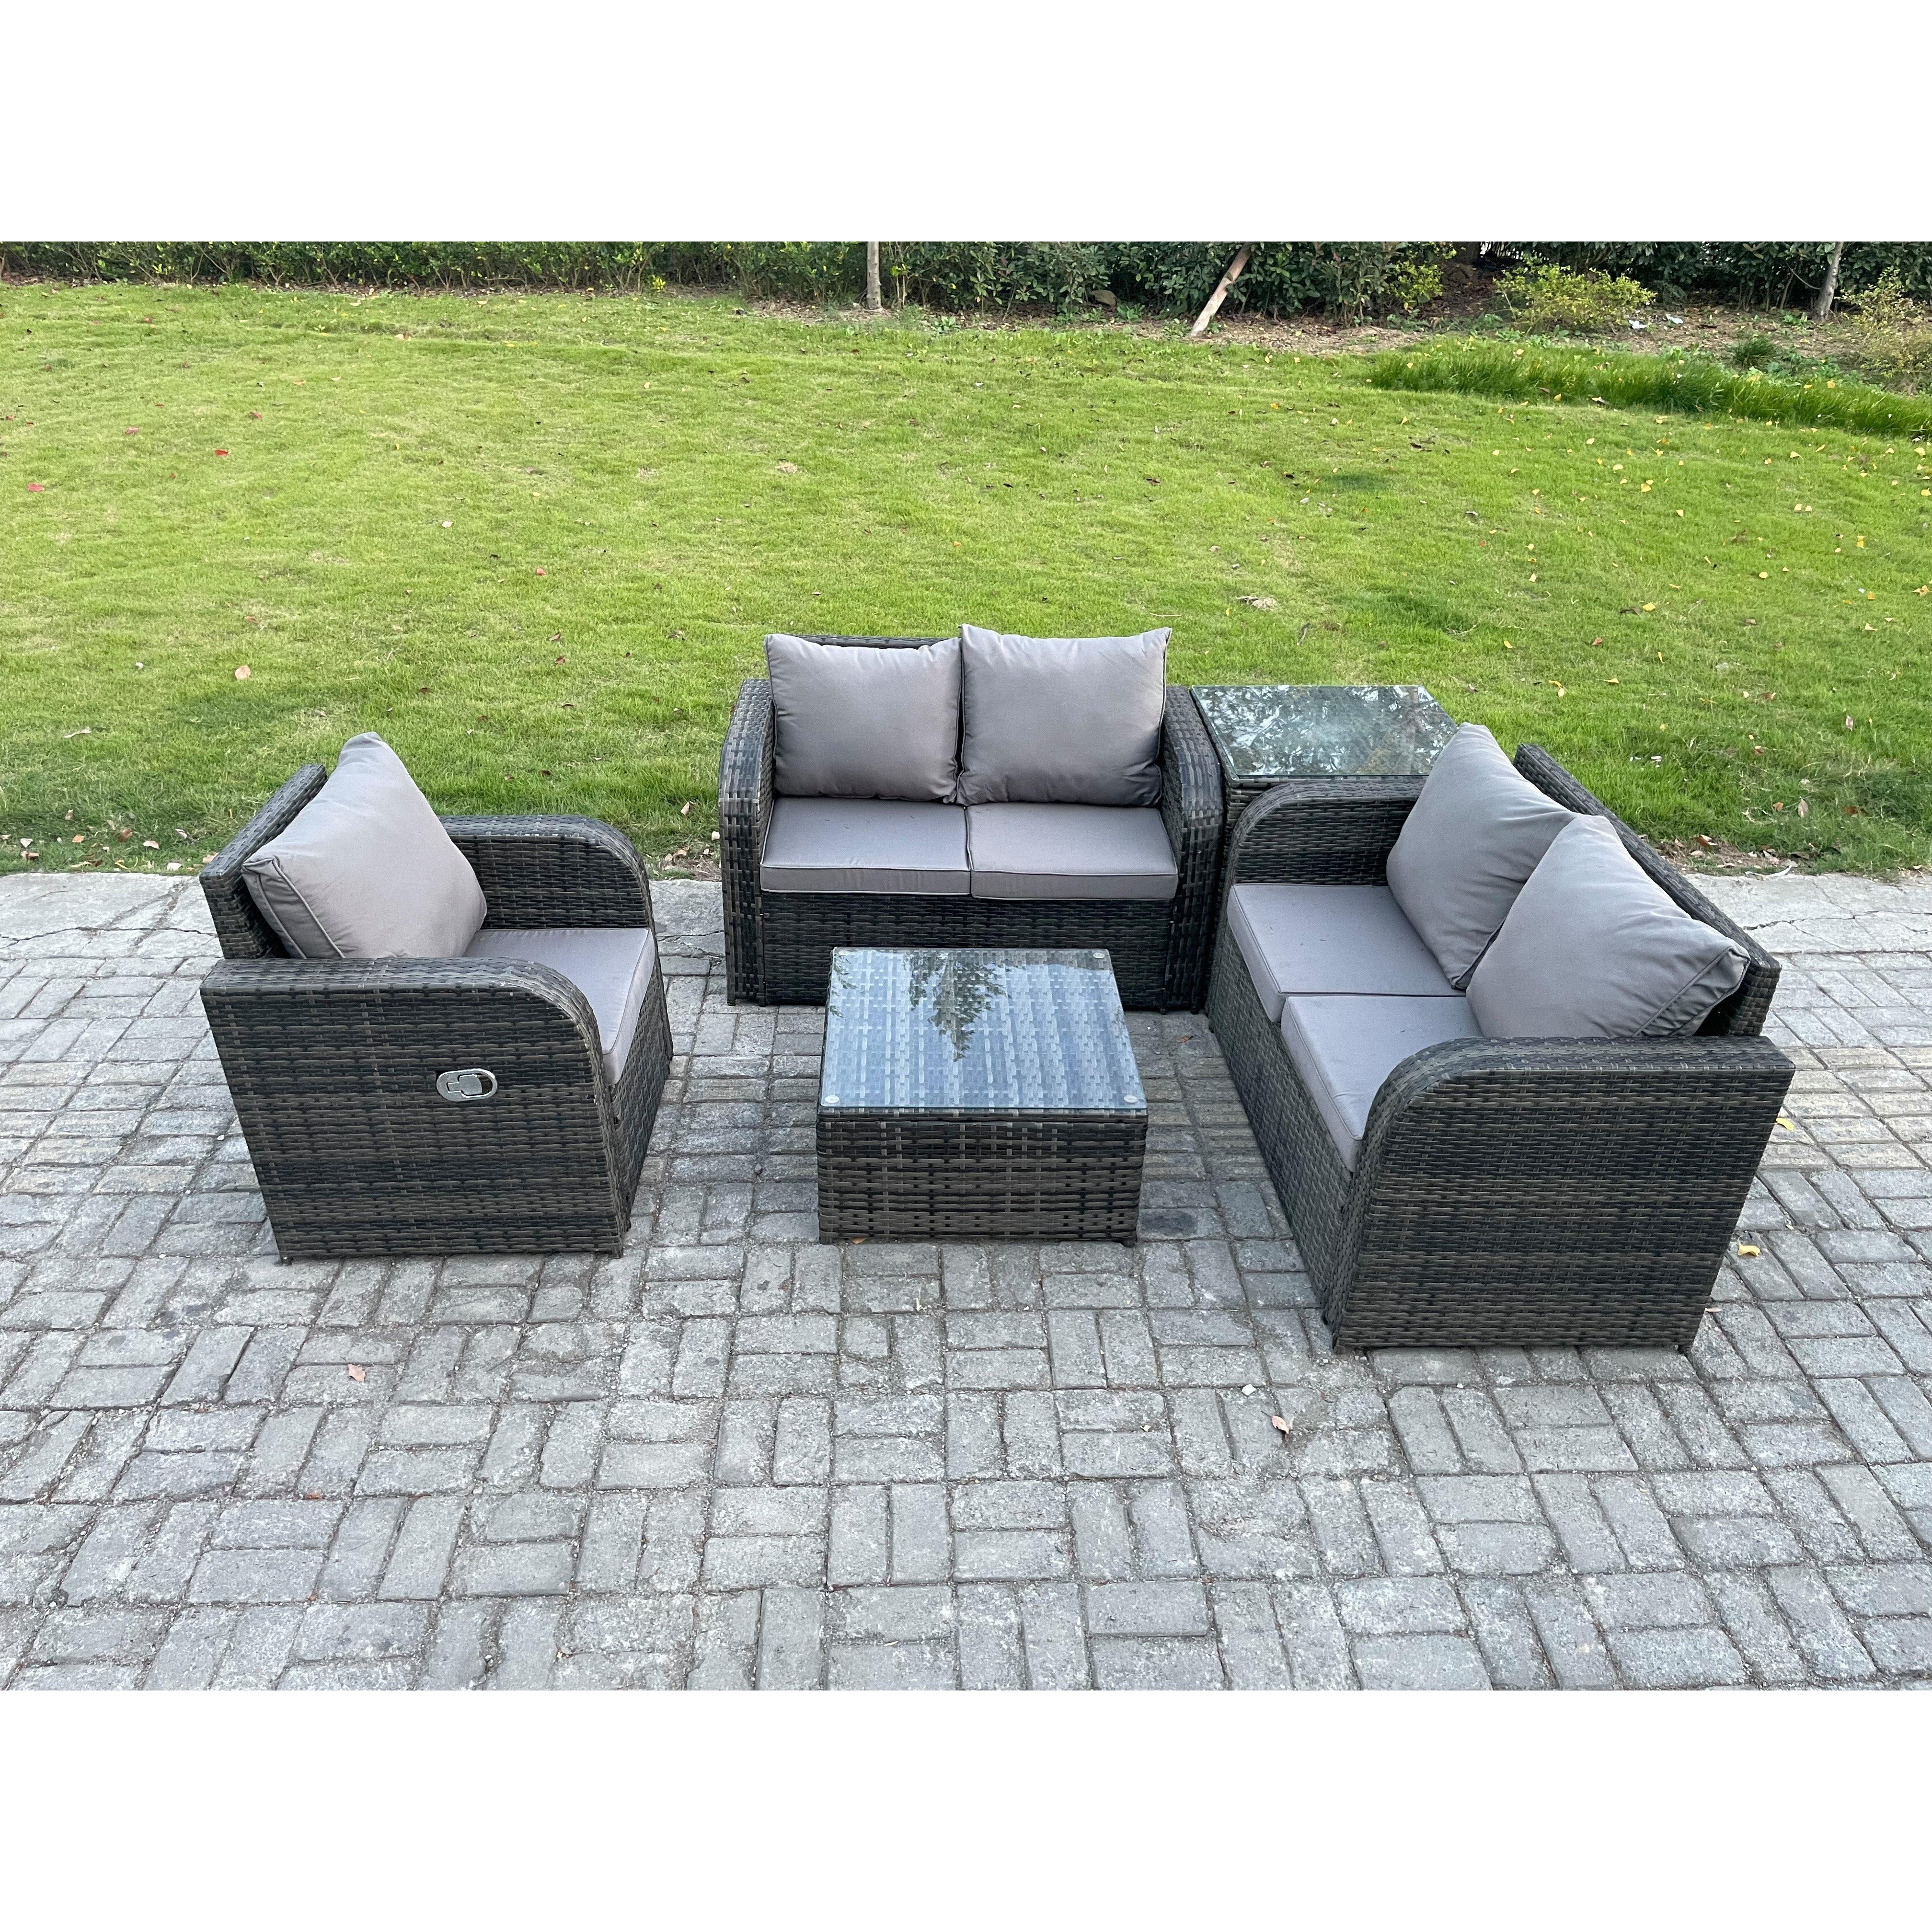 5 Piece Garden Furniture Sets 5 Seater Outdoor Patio Furniture Set Weaving Wicker Rattan Sofa Chair and Table with Side Table - image 1